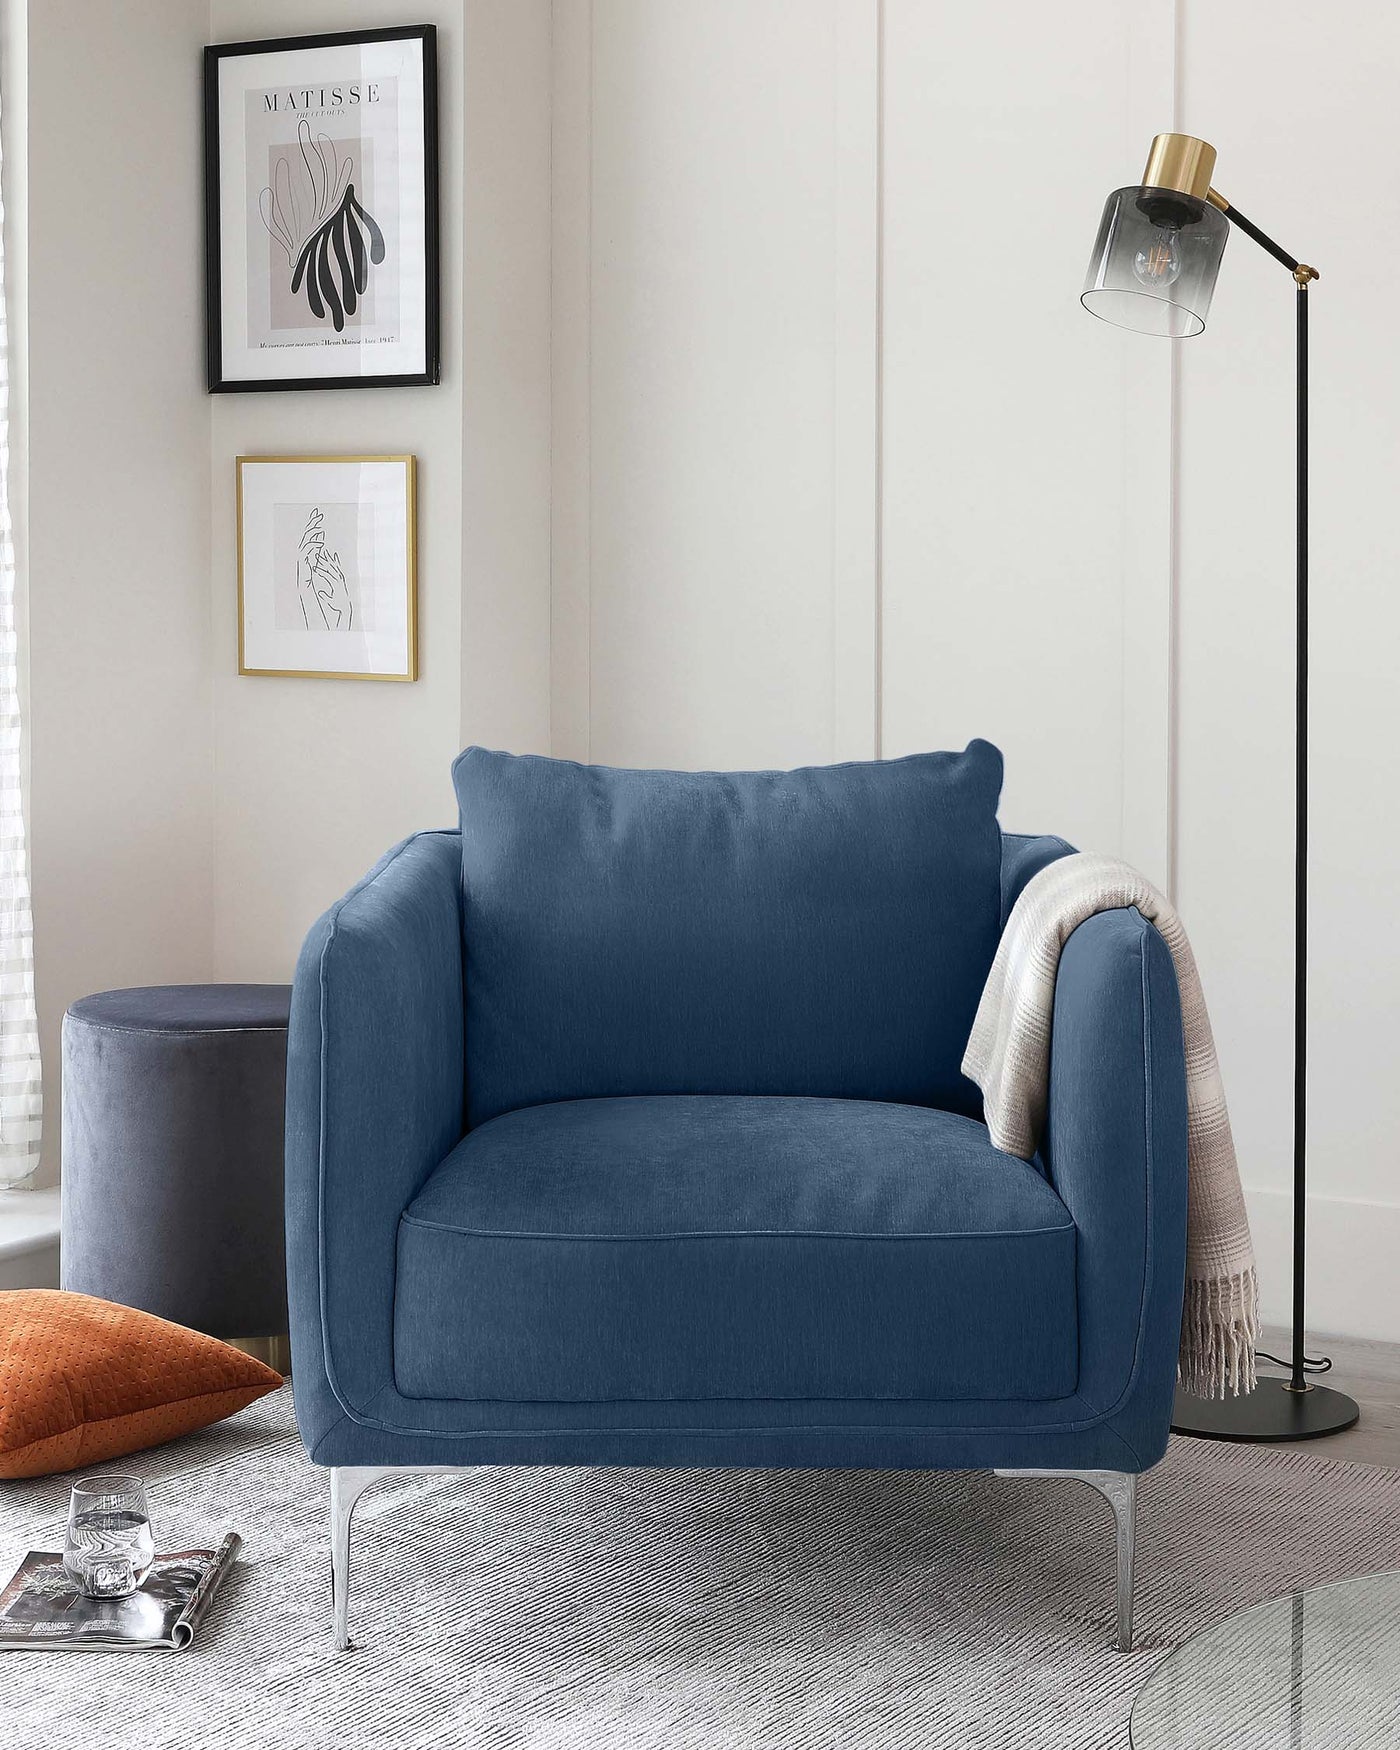 A modern navy blue fabric armchair with clean lines and metal legs, paired with a matching round navy blue ottoman, complemented by a sleek black floor lamp with a transparent shade and brass accents.